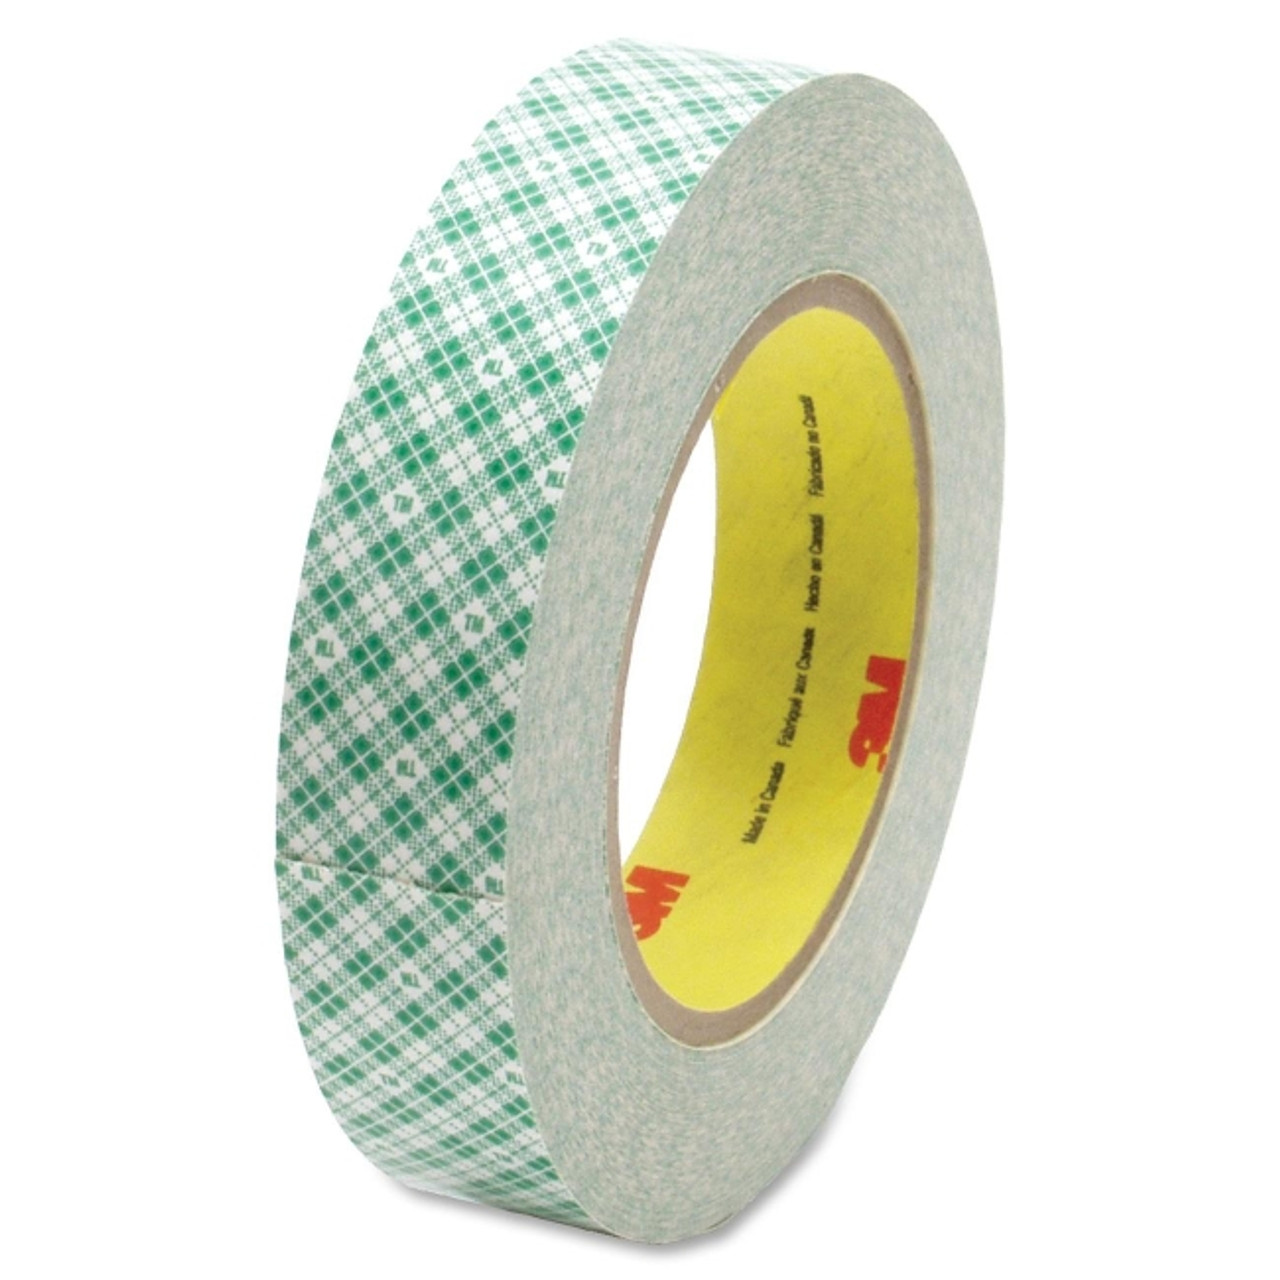 Scotch Double-coated Paper Tape - 2 Width X 36 Yd